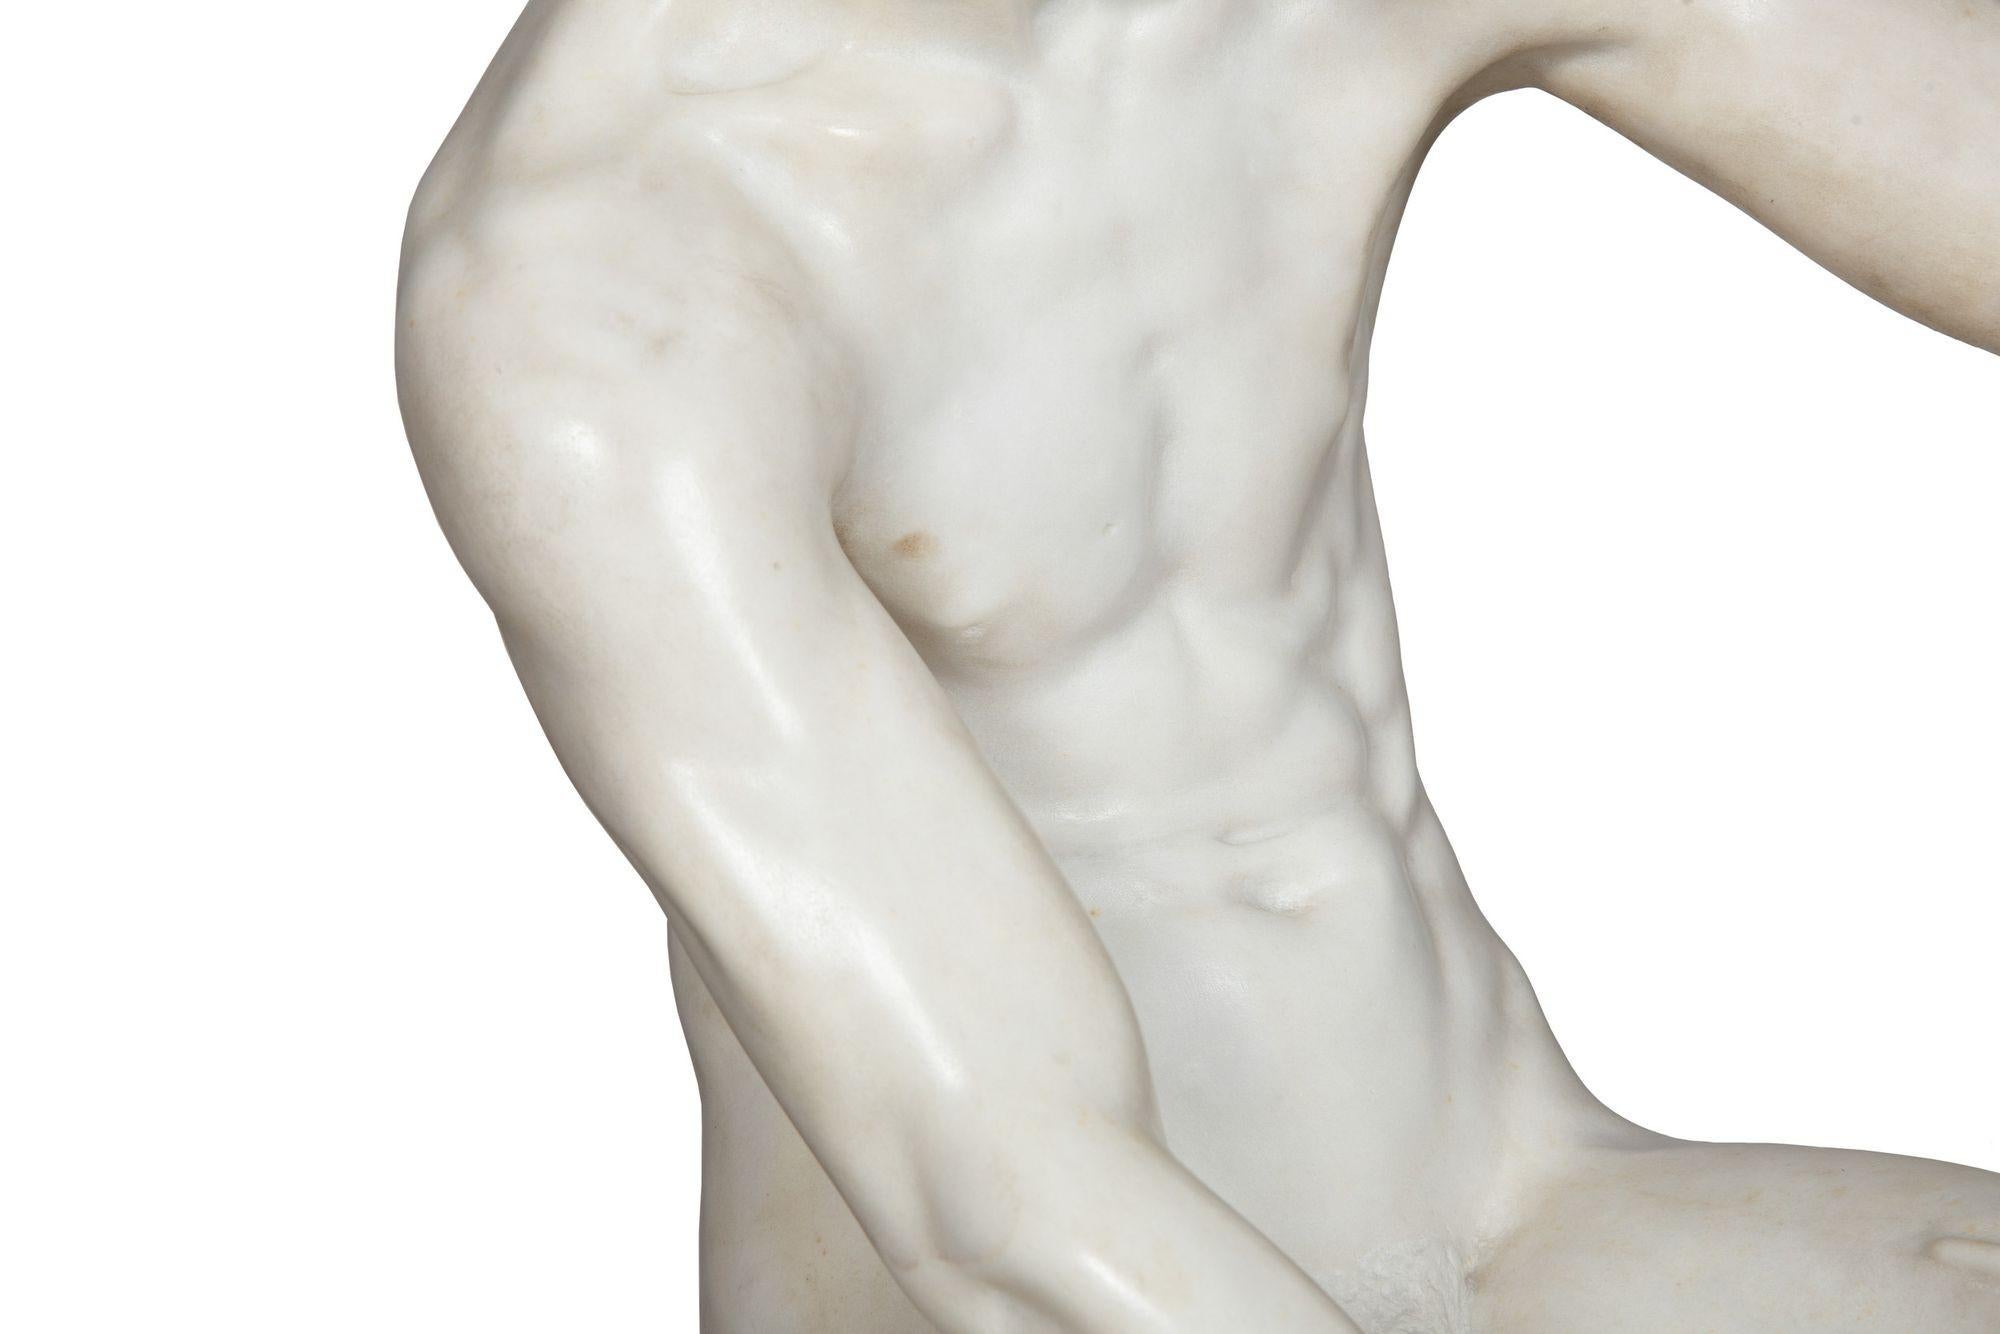 Italian Carved Carrara Marble Art Deco Sculpture of “Stone Carver” by Barsanti For Sale 2